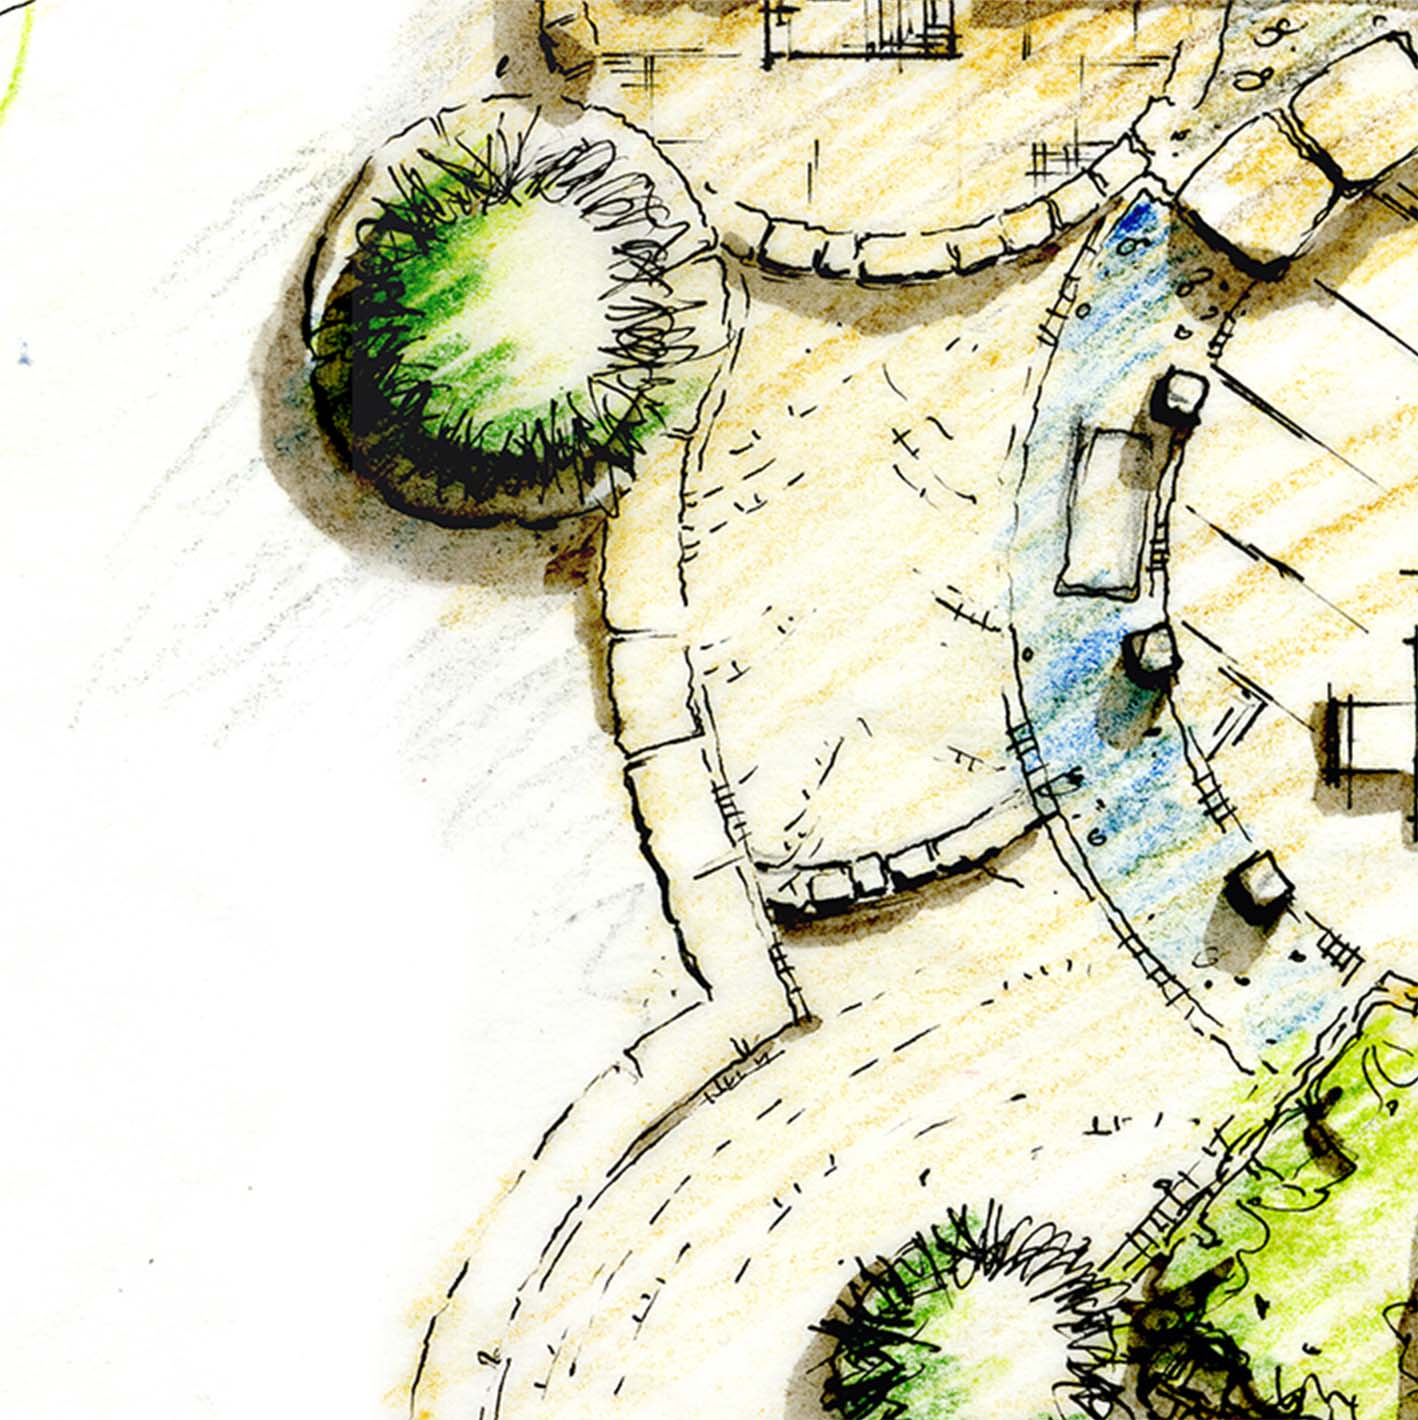 Small section of a Garden Design illustration